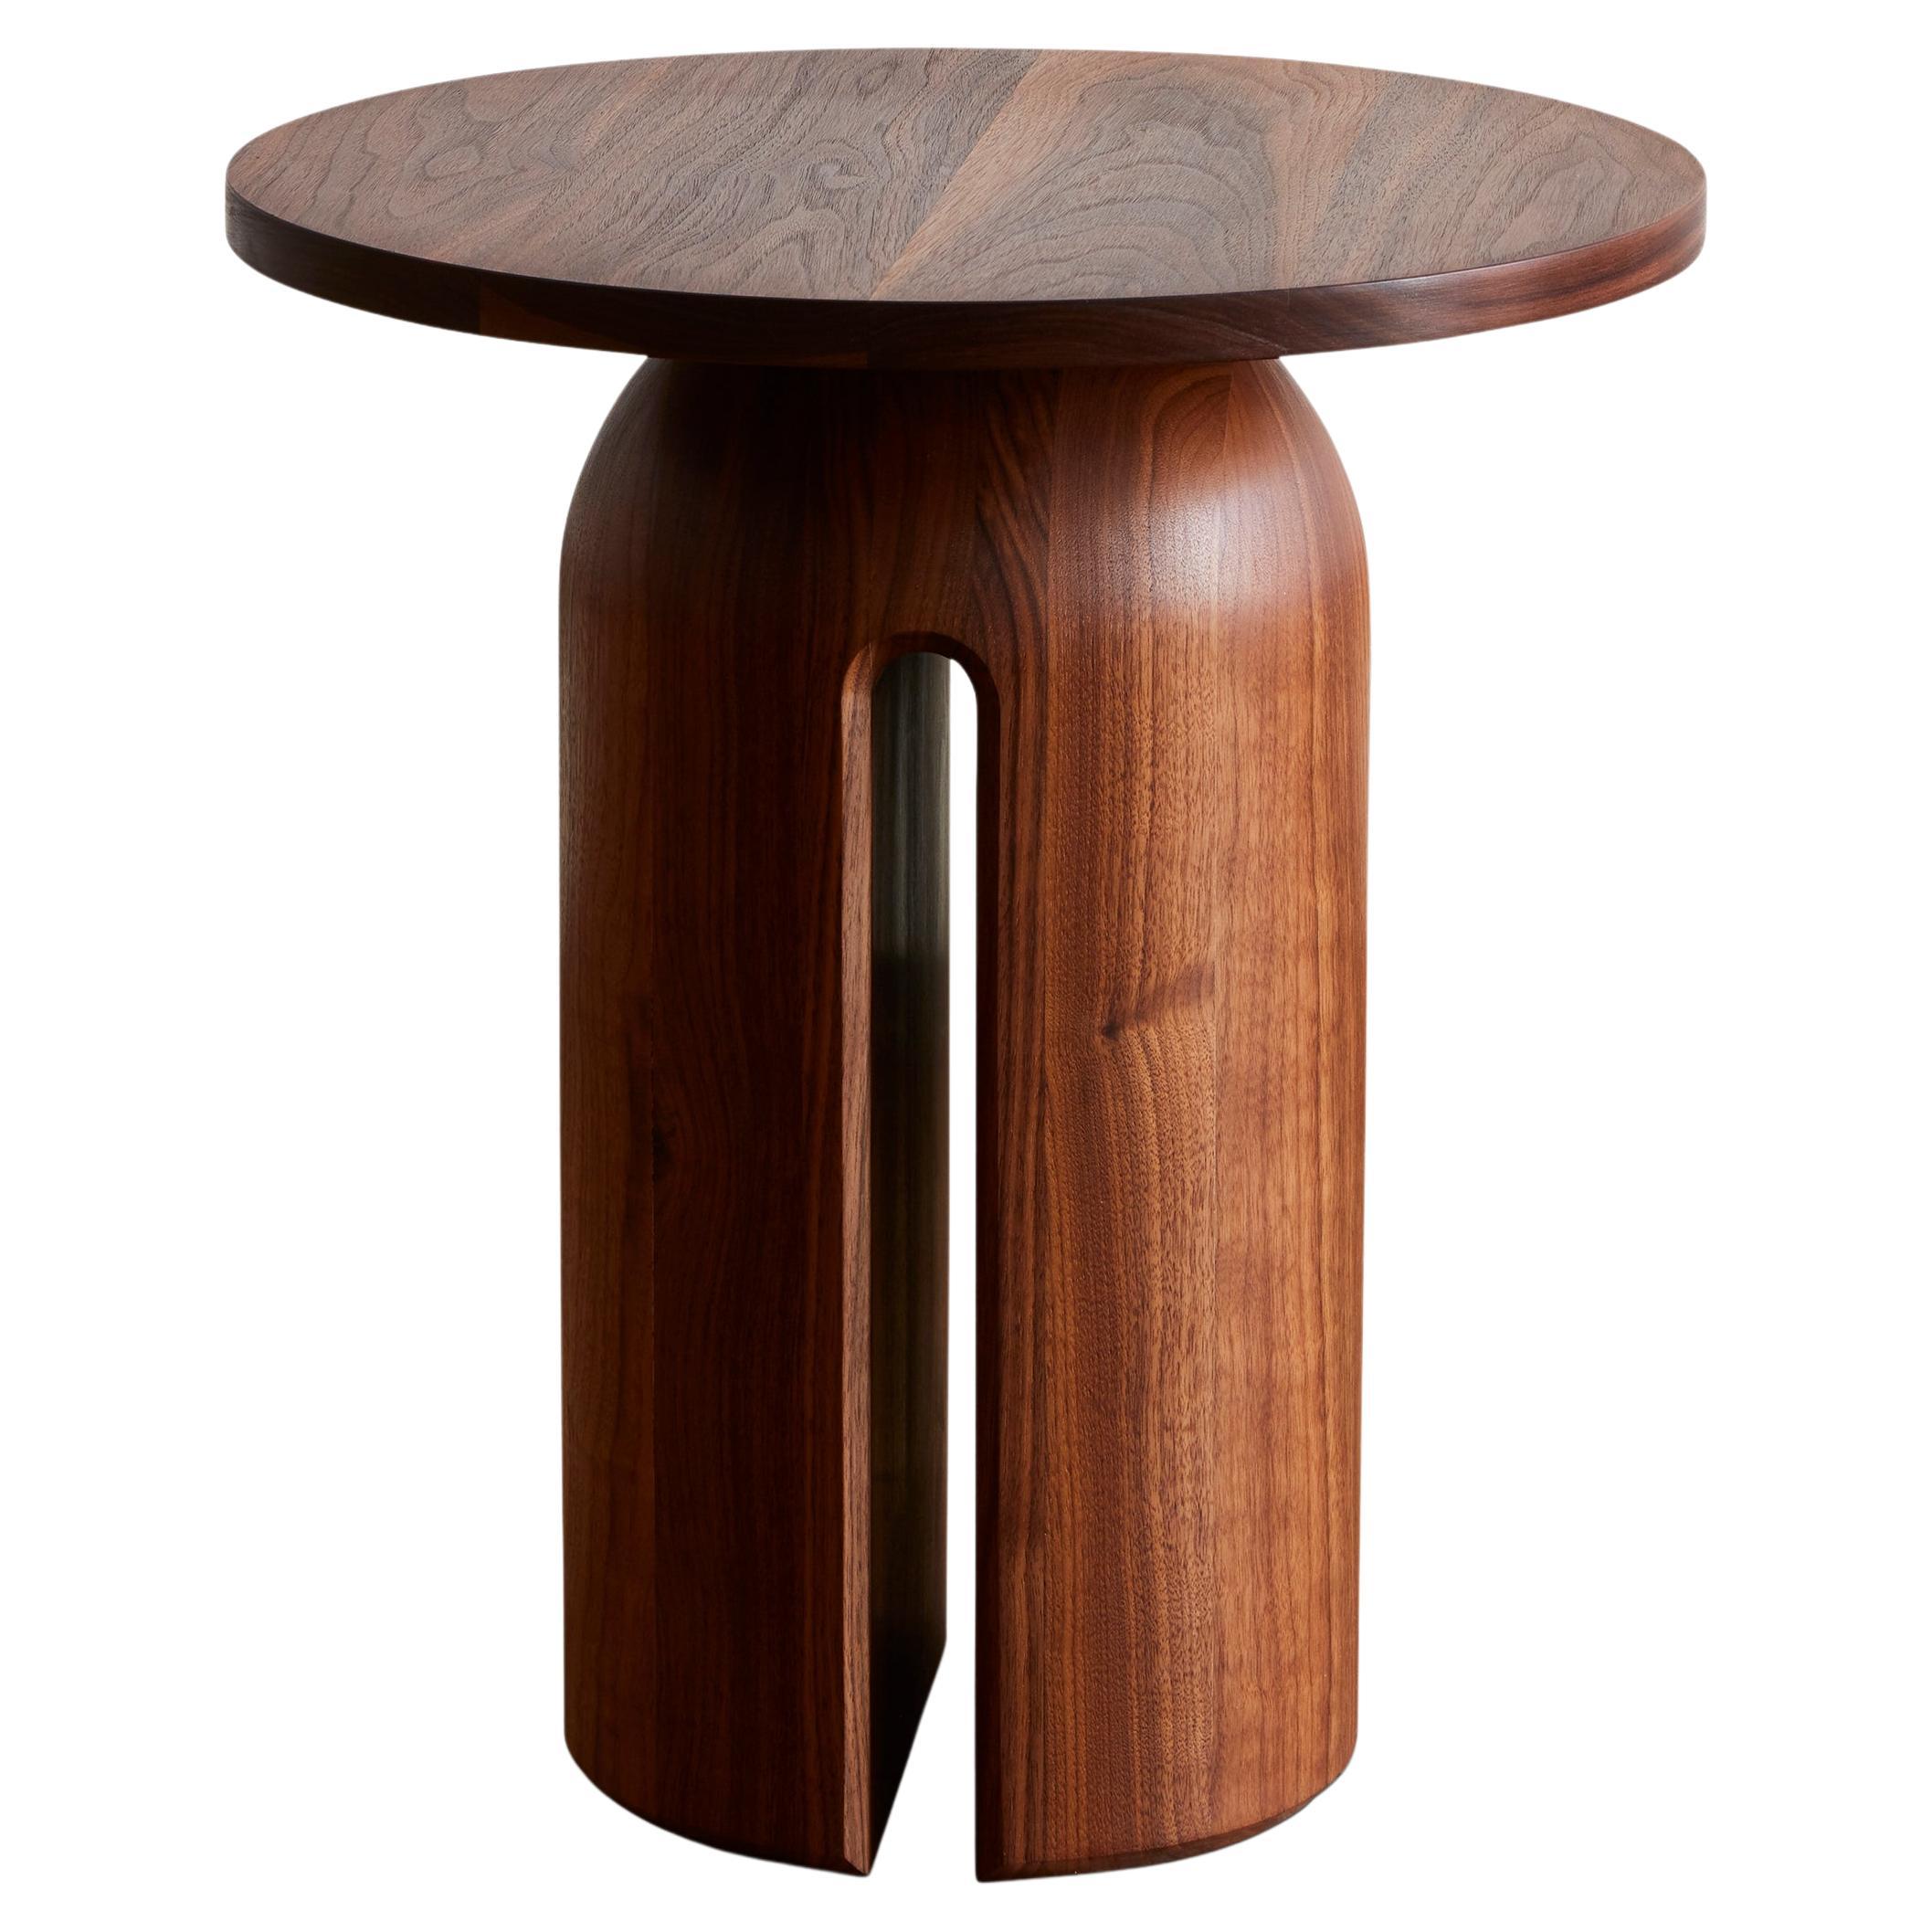 Contemporary Oco Side Table in Solid Wood by Luteca for indoor outdoor use For Sale